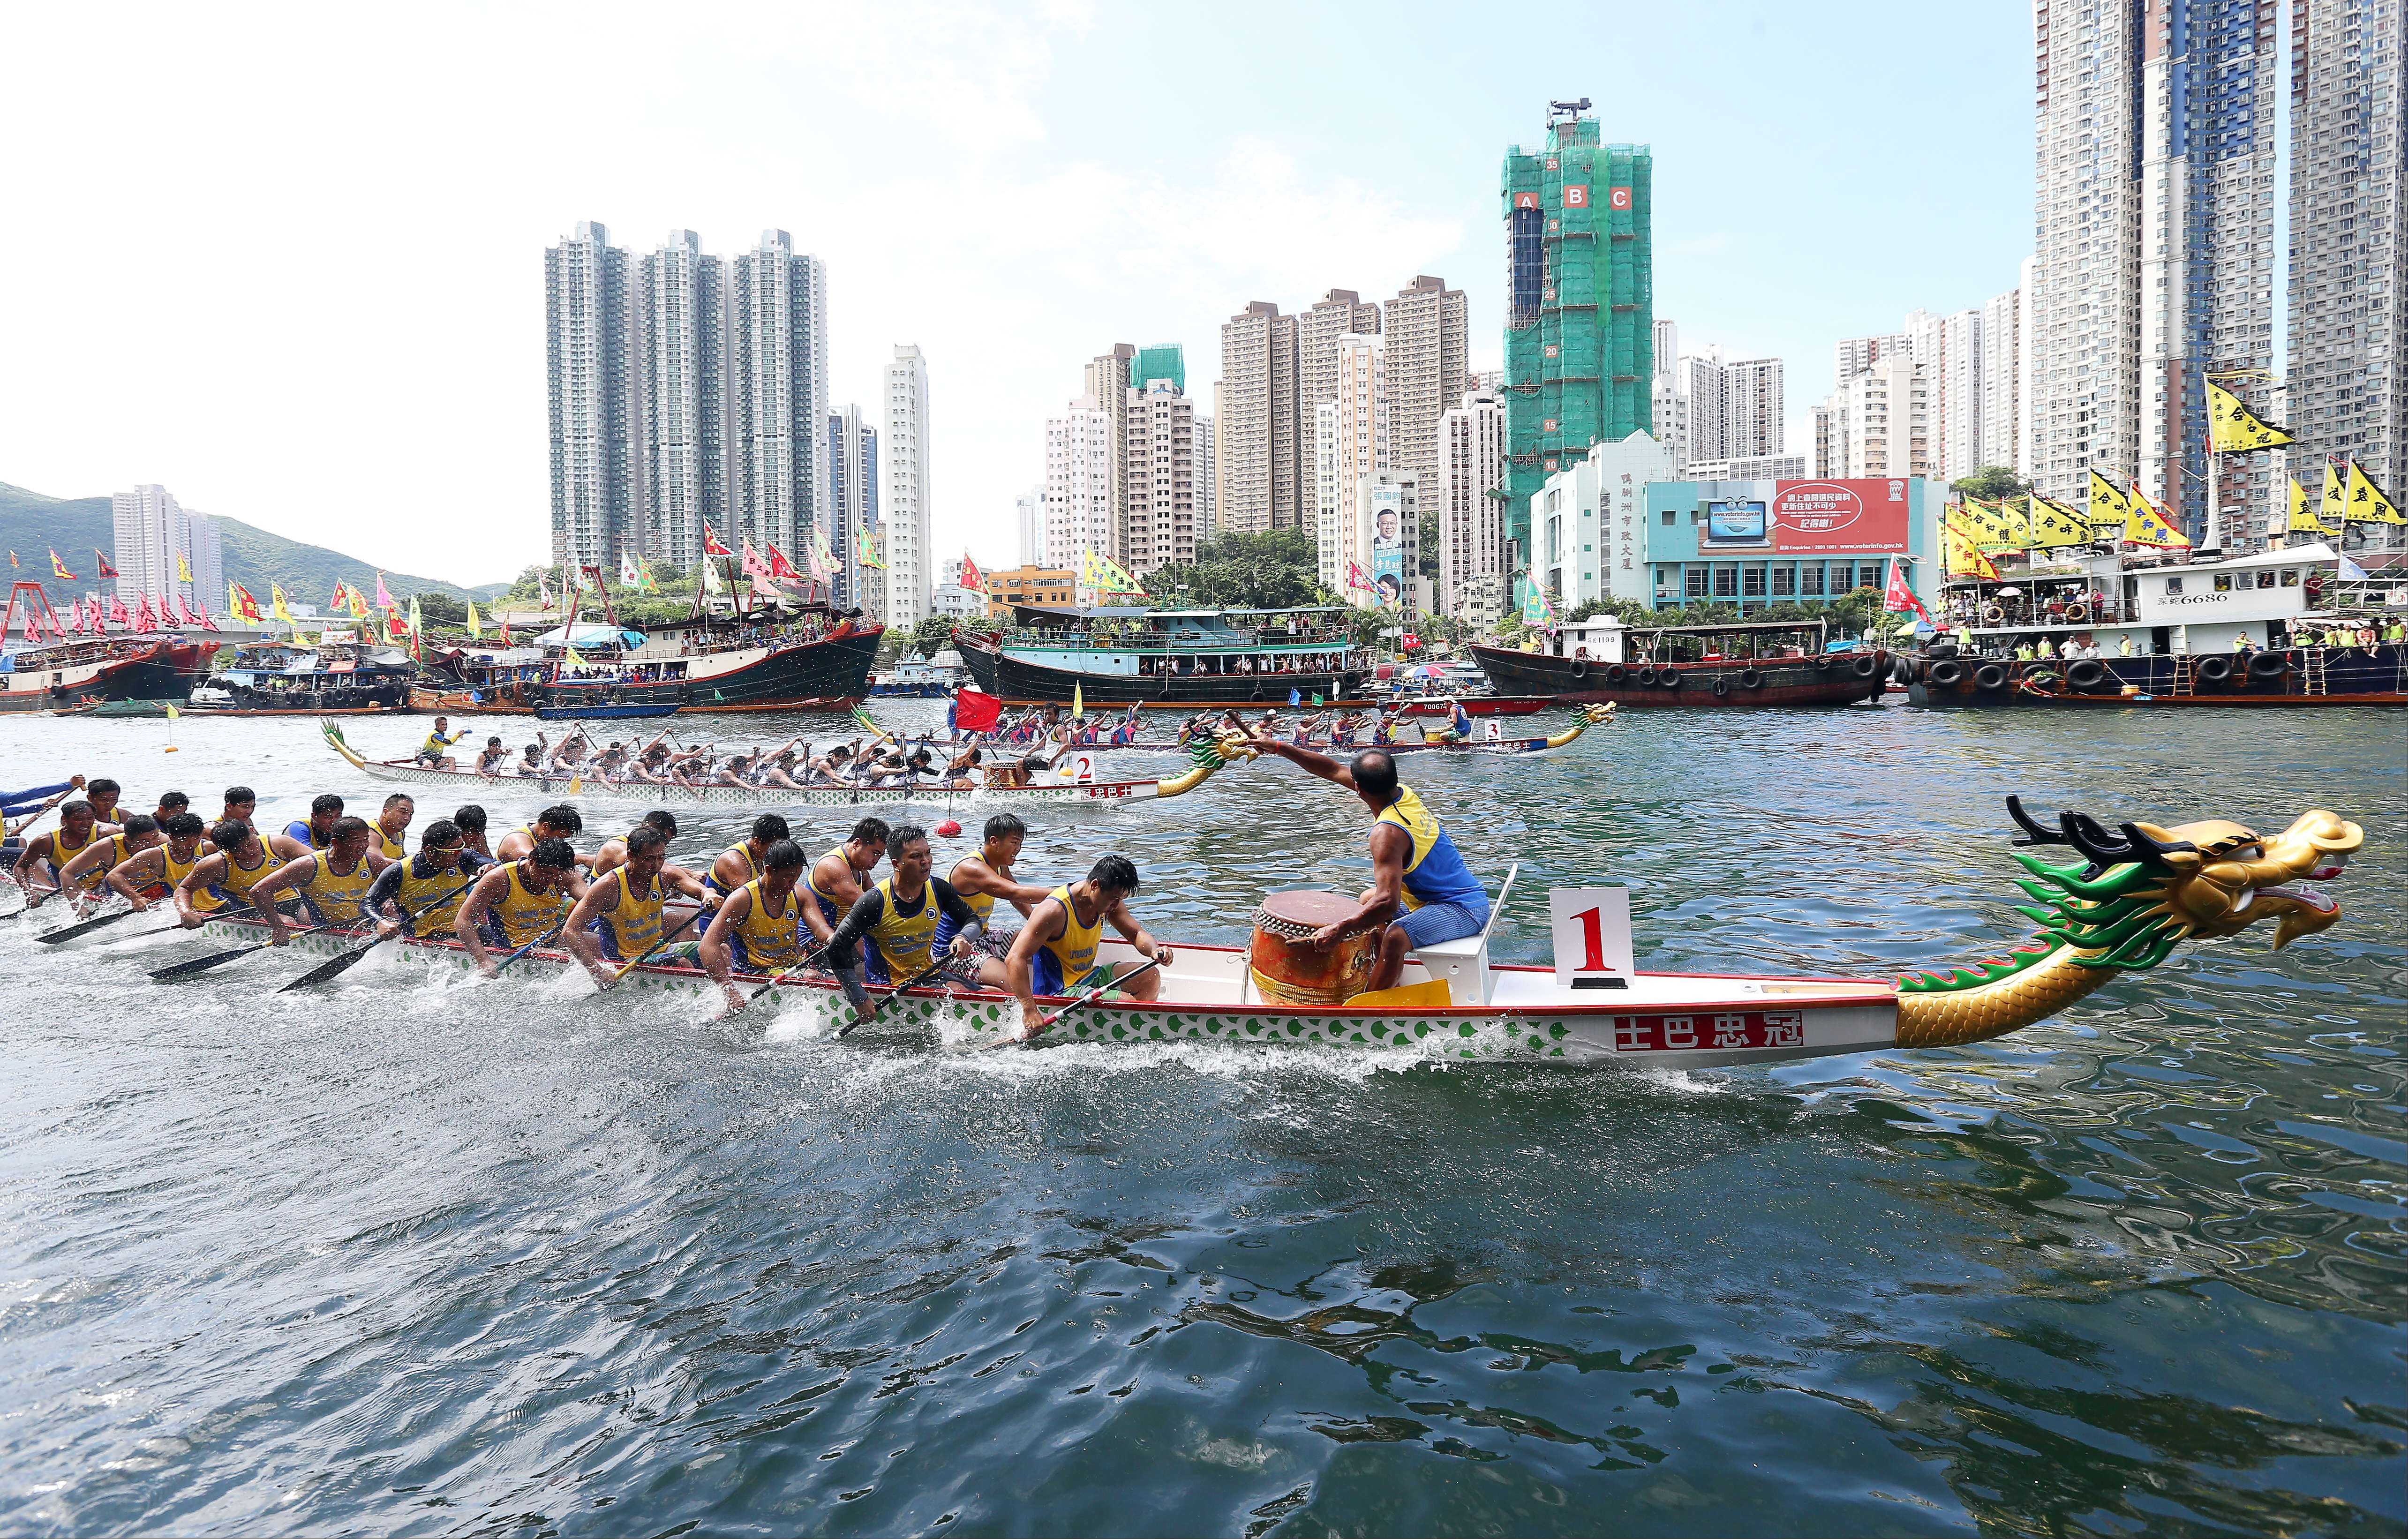 Some 4,000 athletes from 14 countries and regions will compete in the races this year. Photo: Dickson Lee